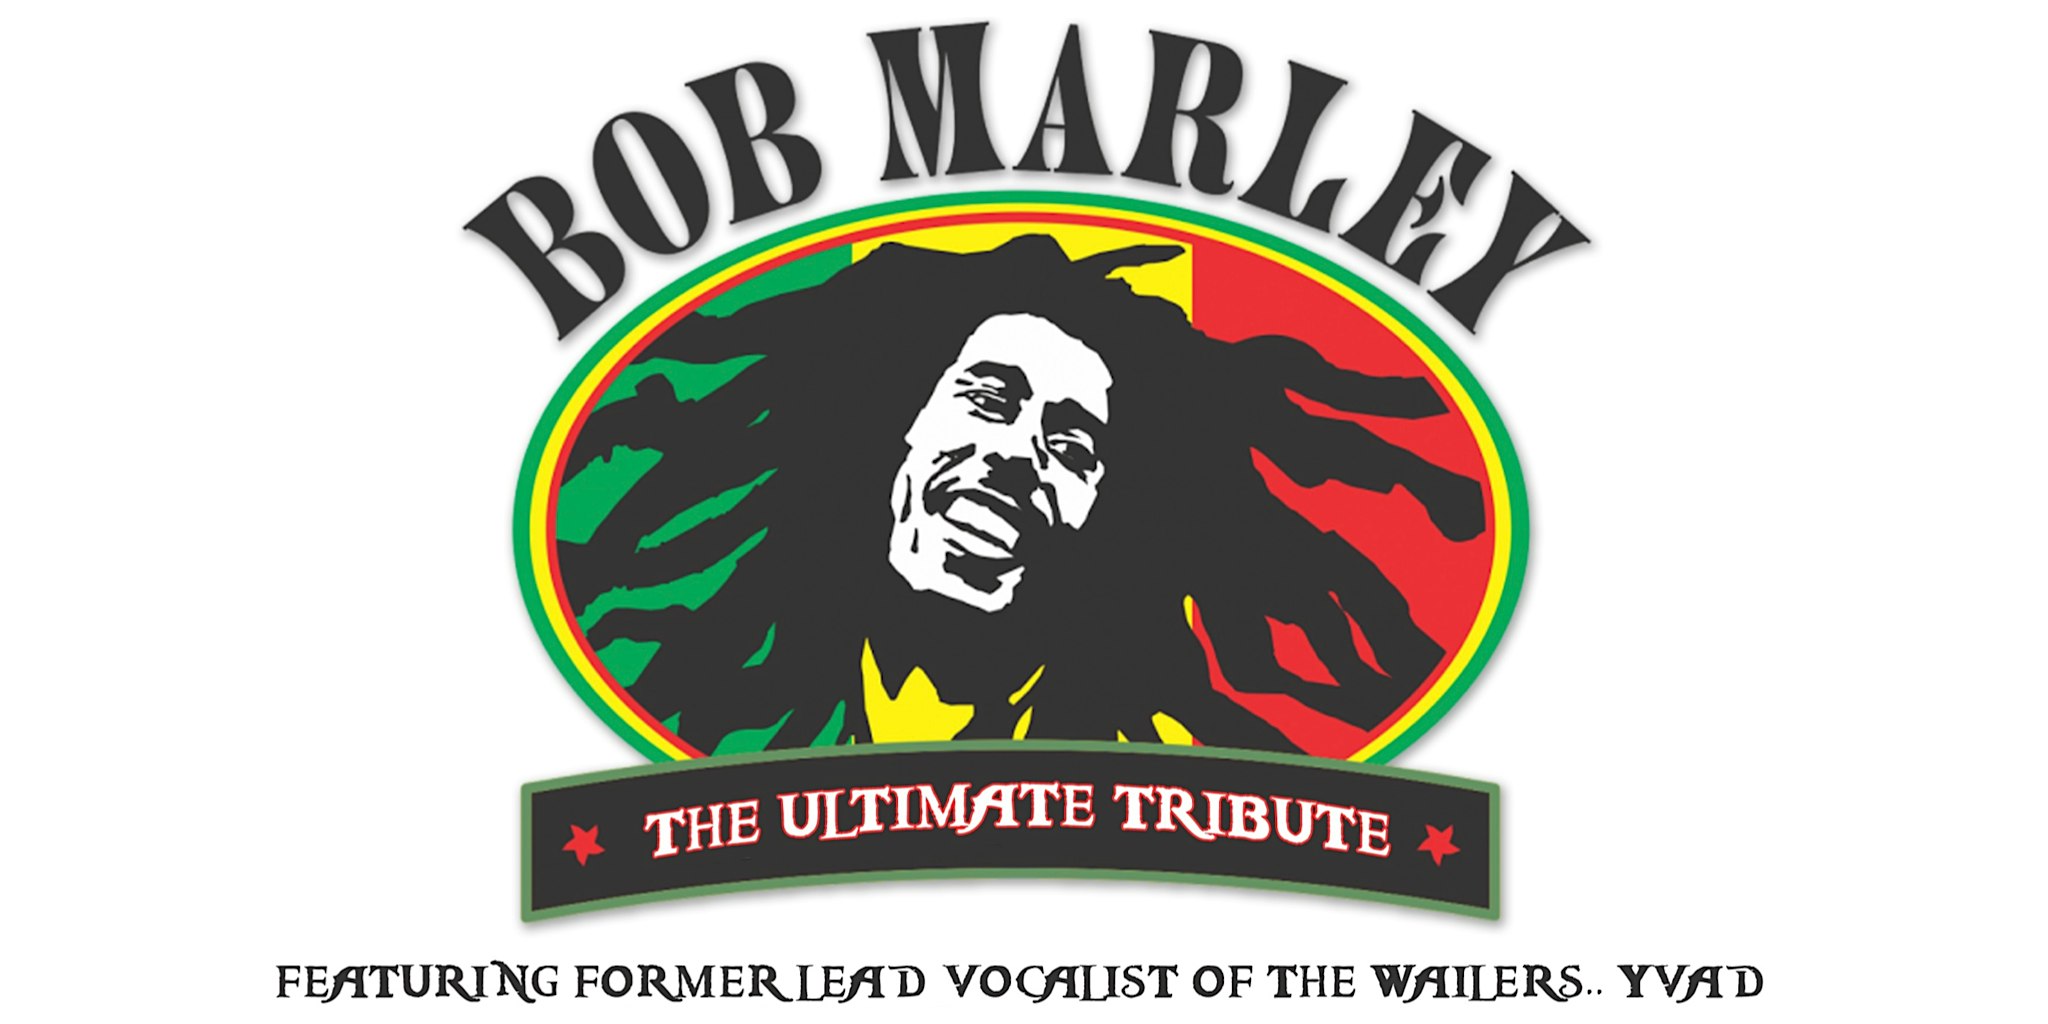 Bob Marley Tribute feat. Yvad Davy (Former Lead Vocalist of ‘The Wailers’)